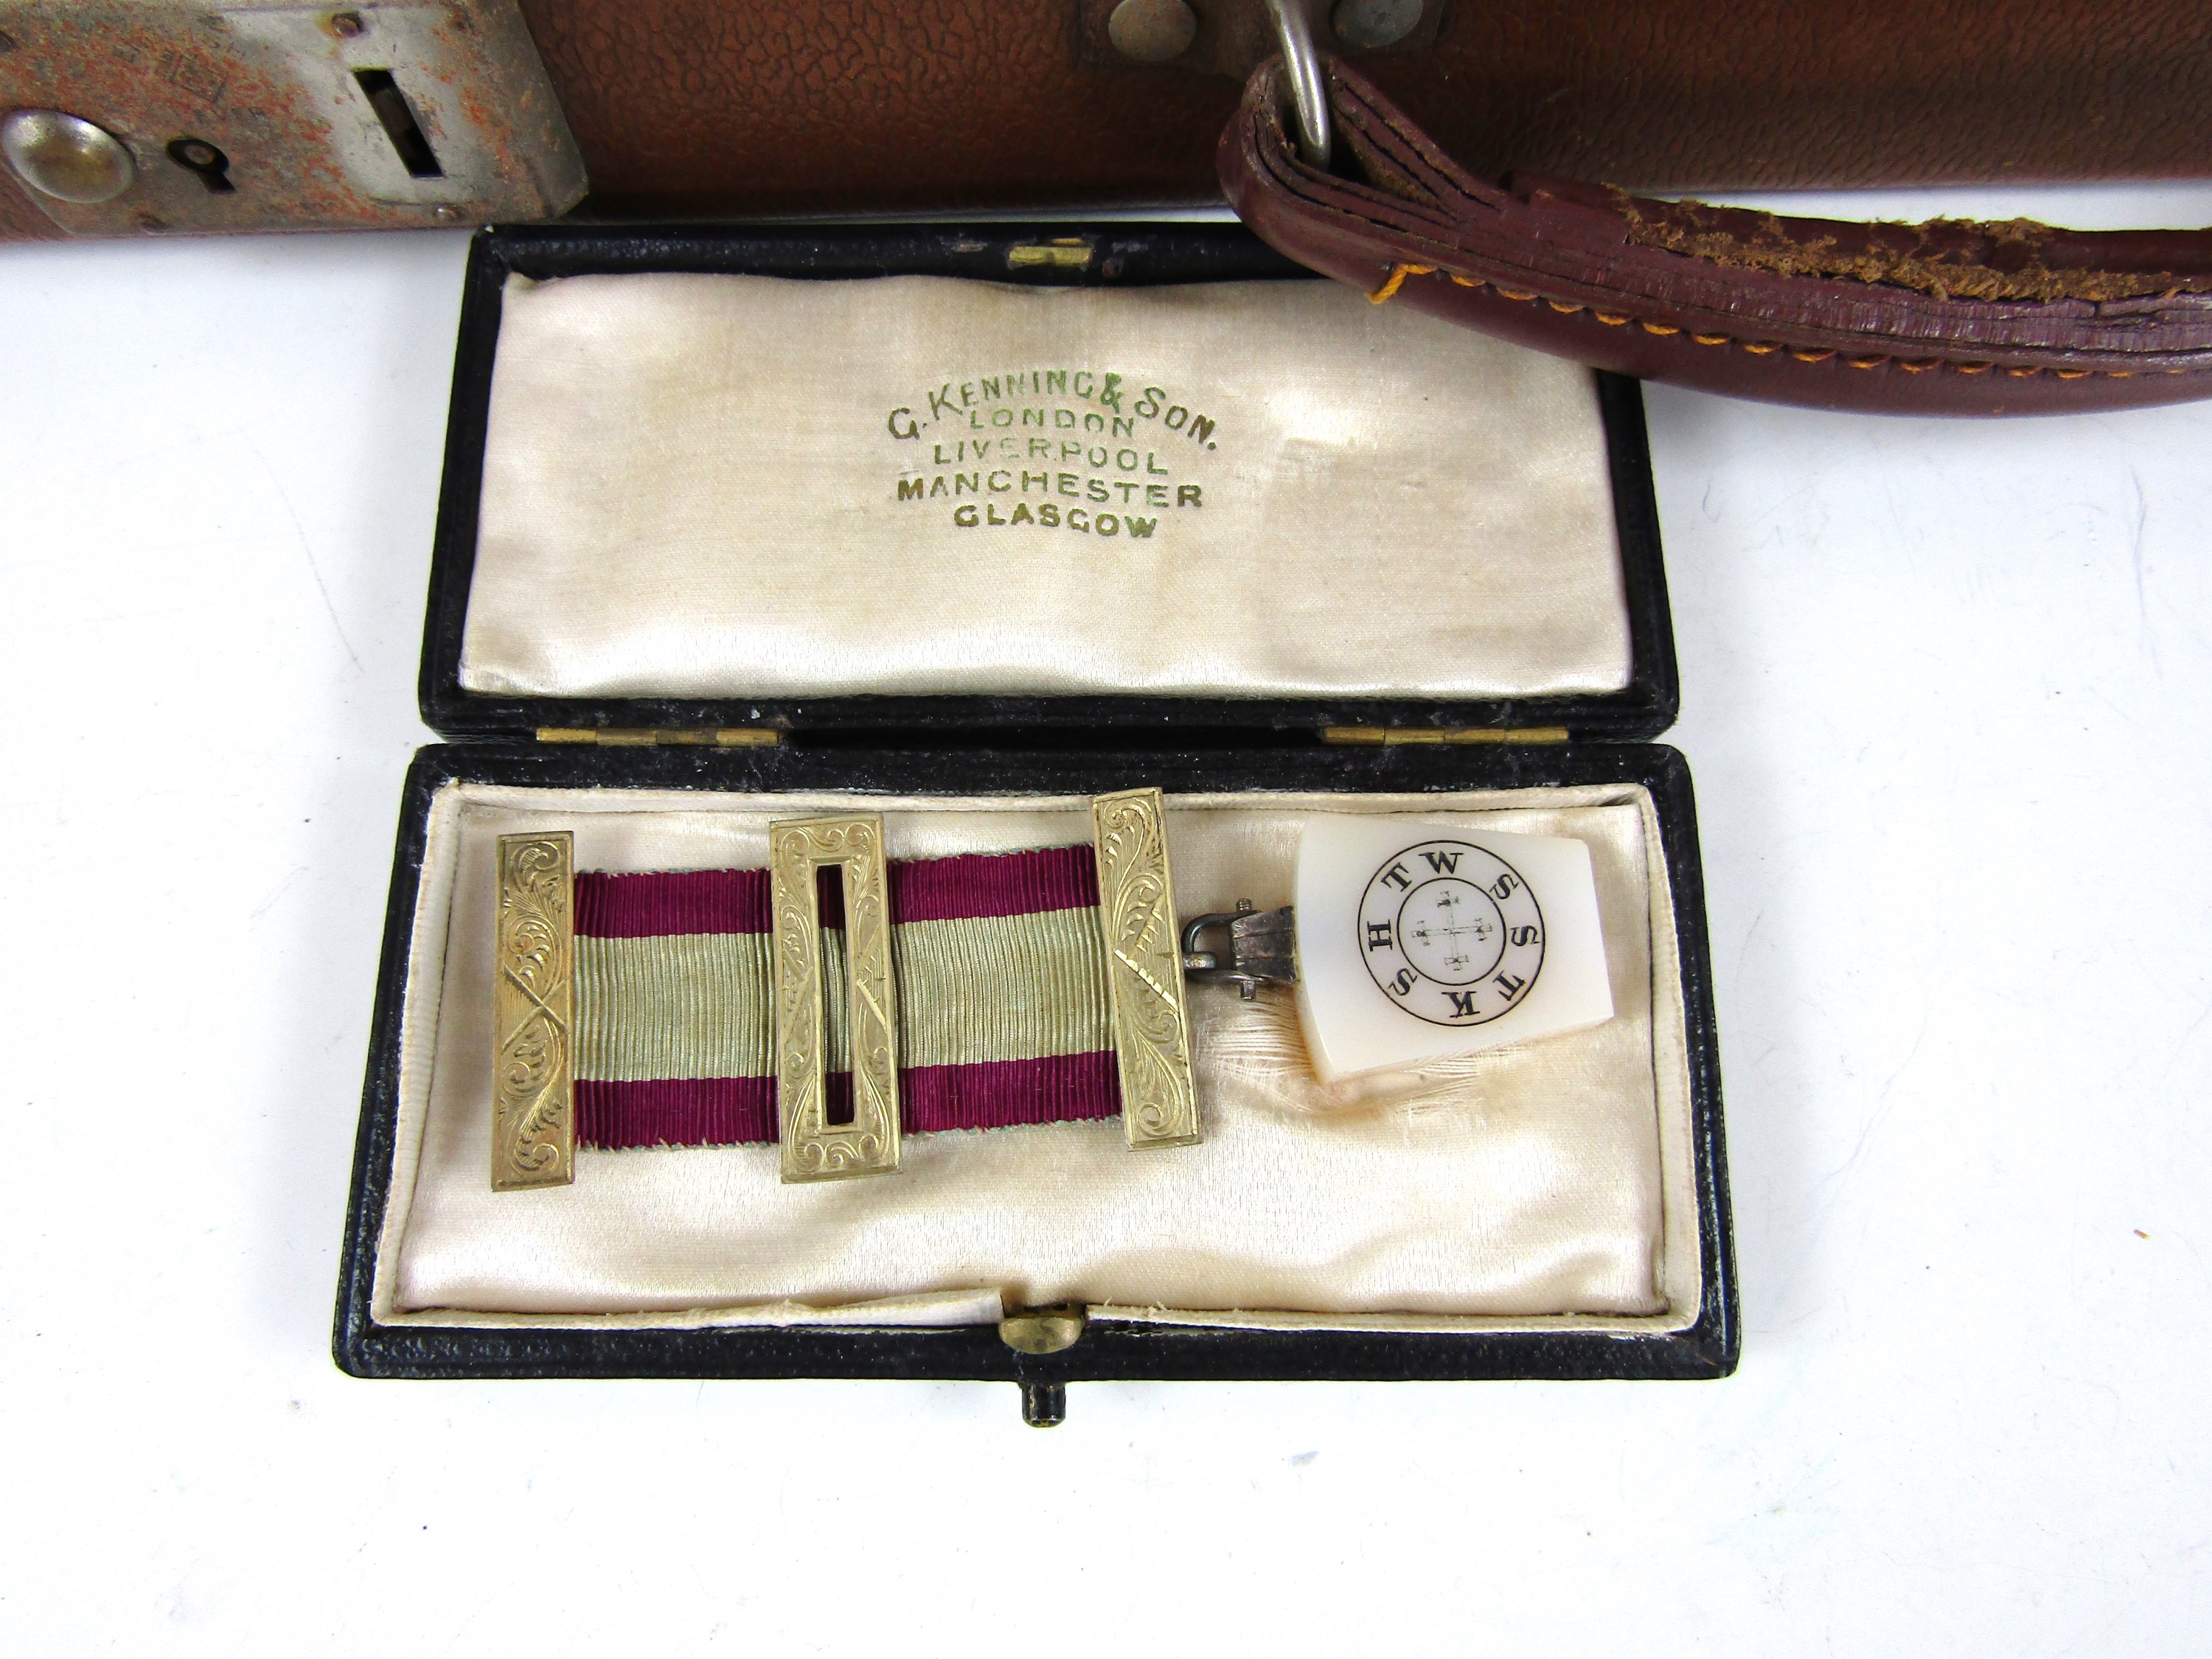 A vintage Masonic case containing a medallion and regalia - Image 2 of 2